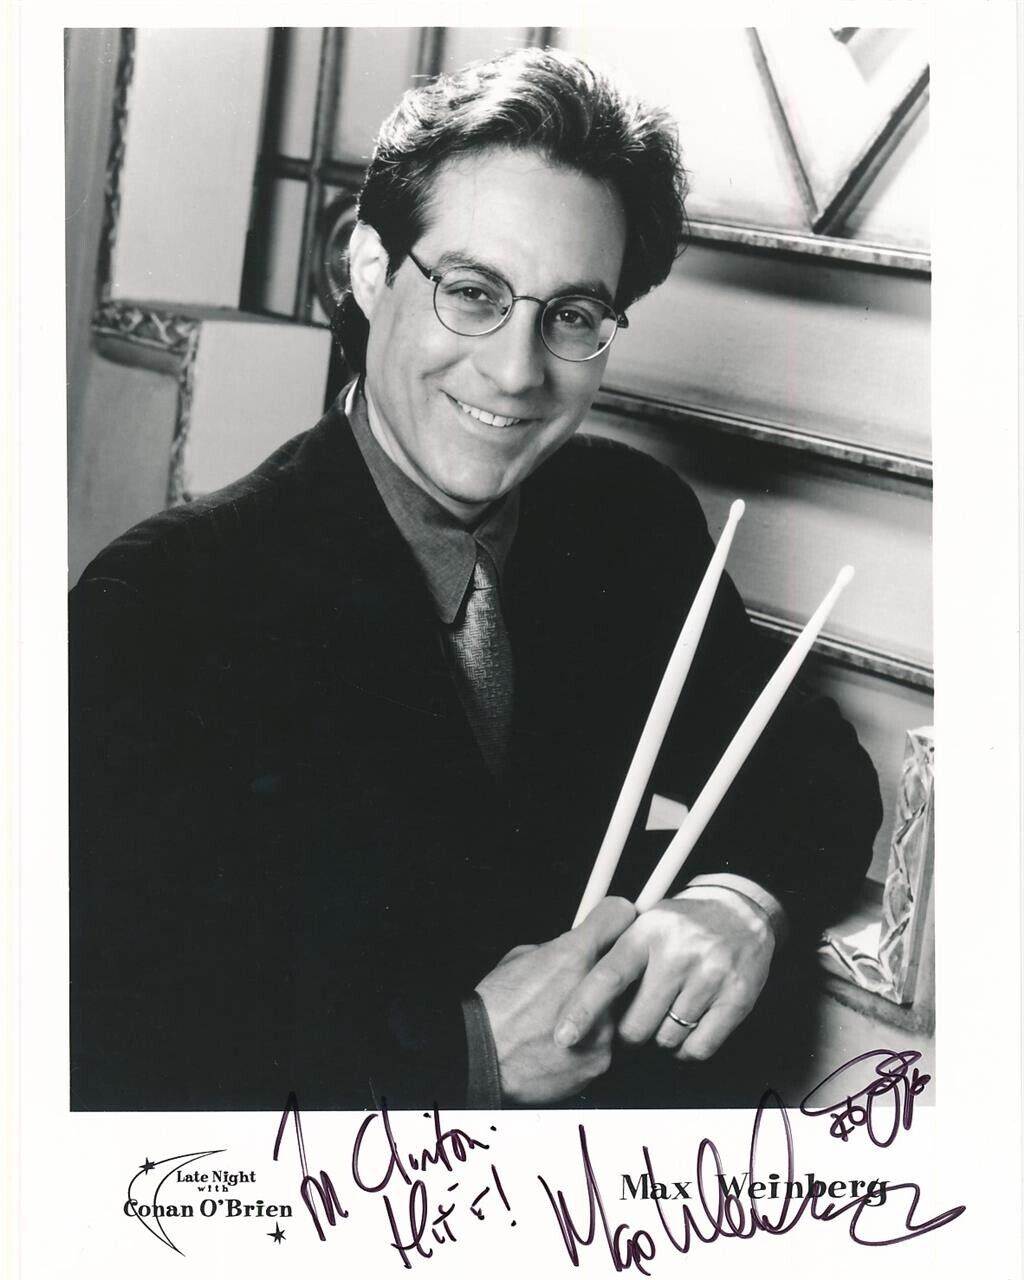 Max Weinberg- Signed B&W Photograph